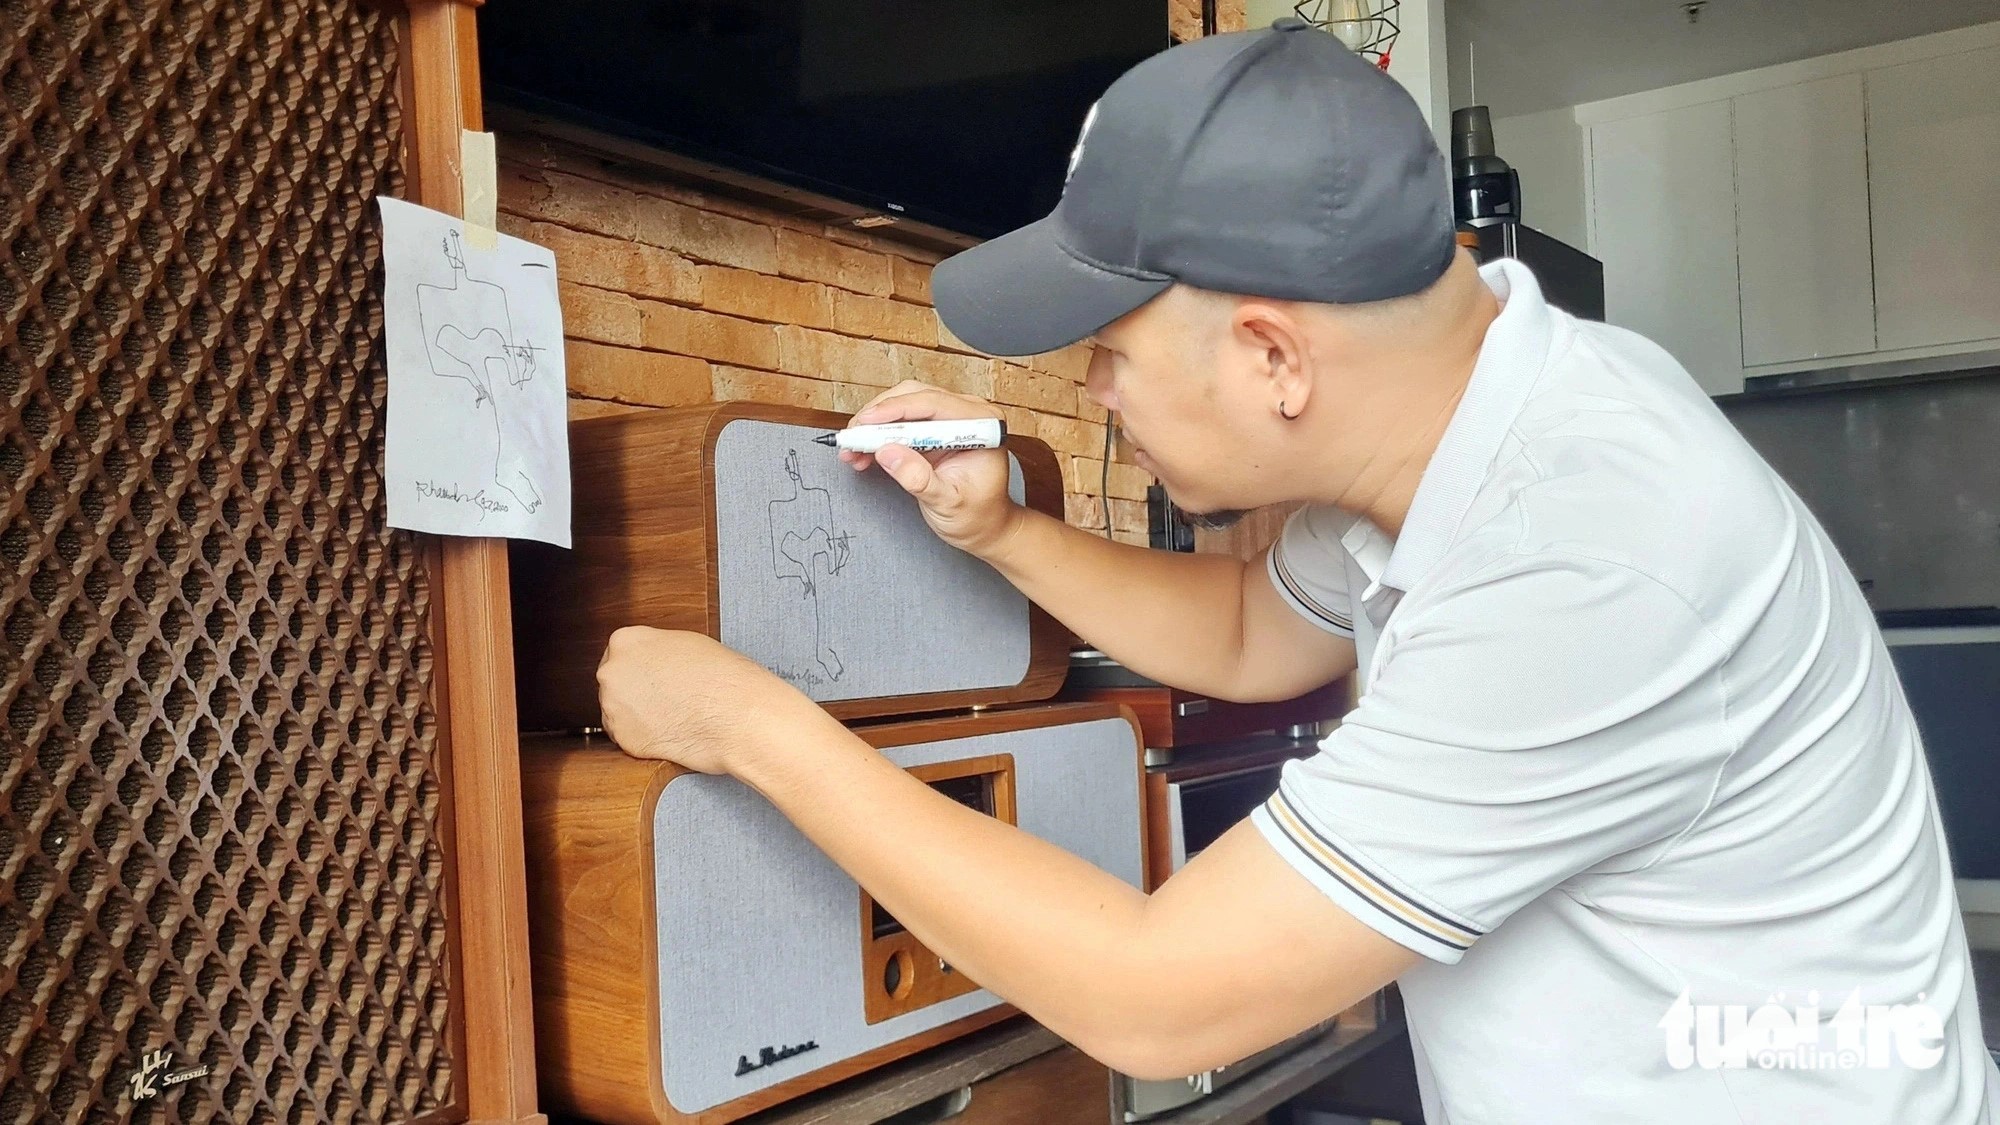 Architect Lam Thanh Tung adds a personal touch by drawing on the speaker grilles of each music player. Photo: M.V. / Tuoi Tre